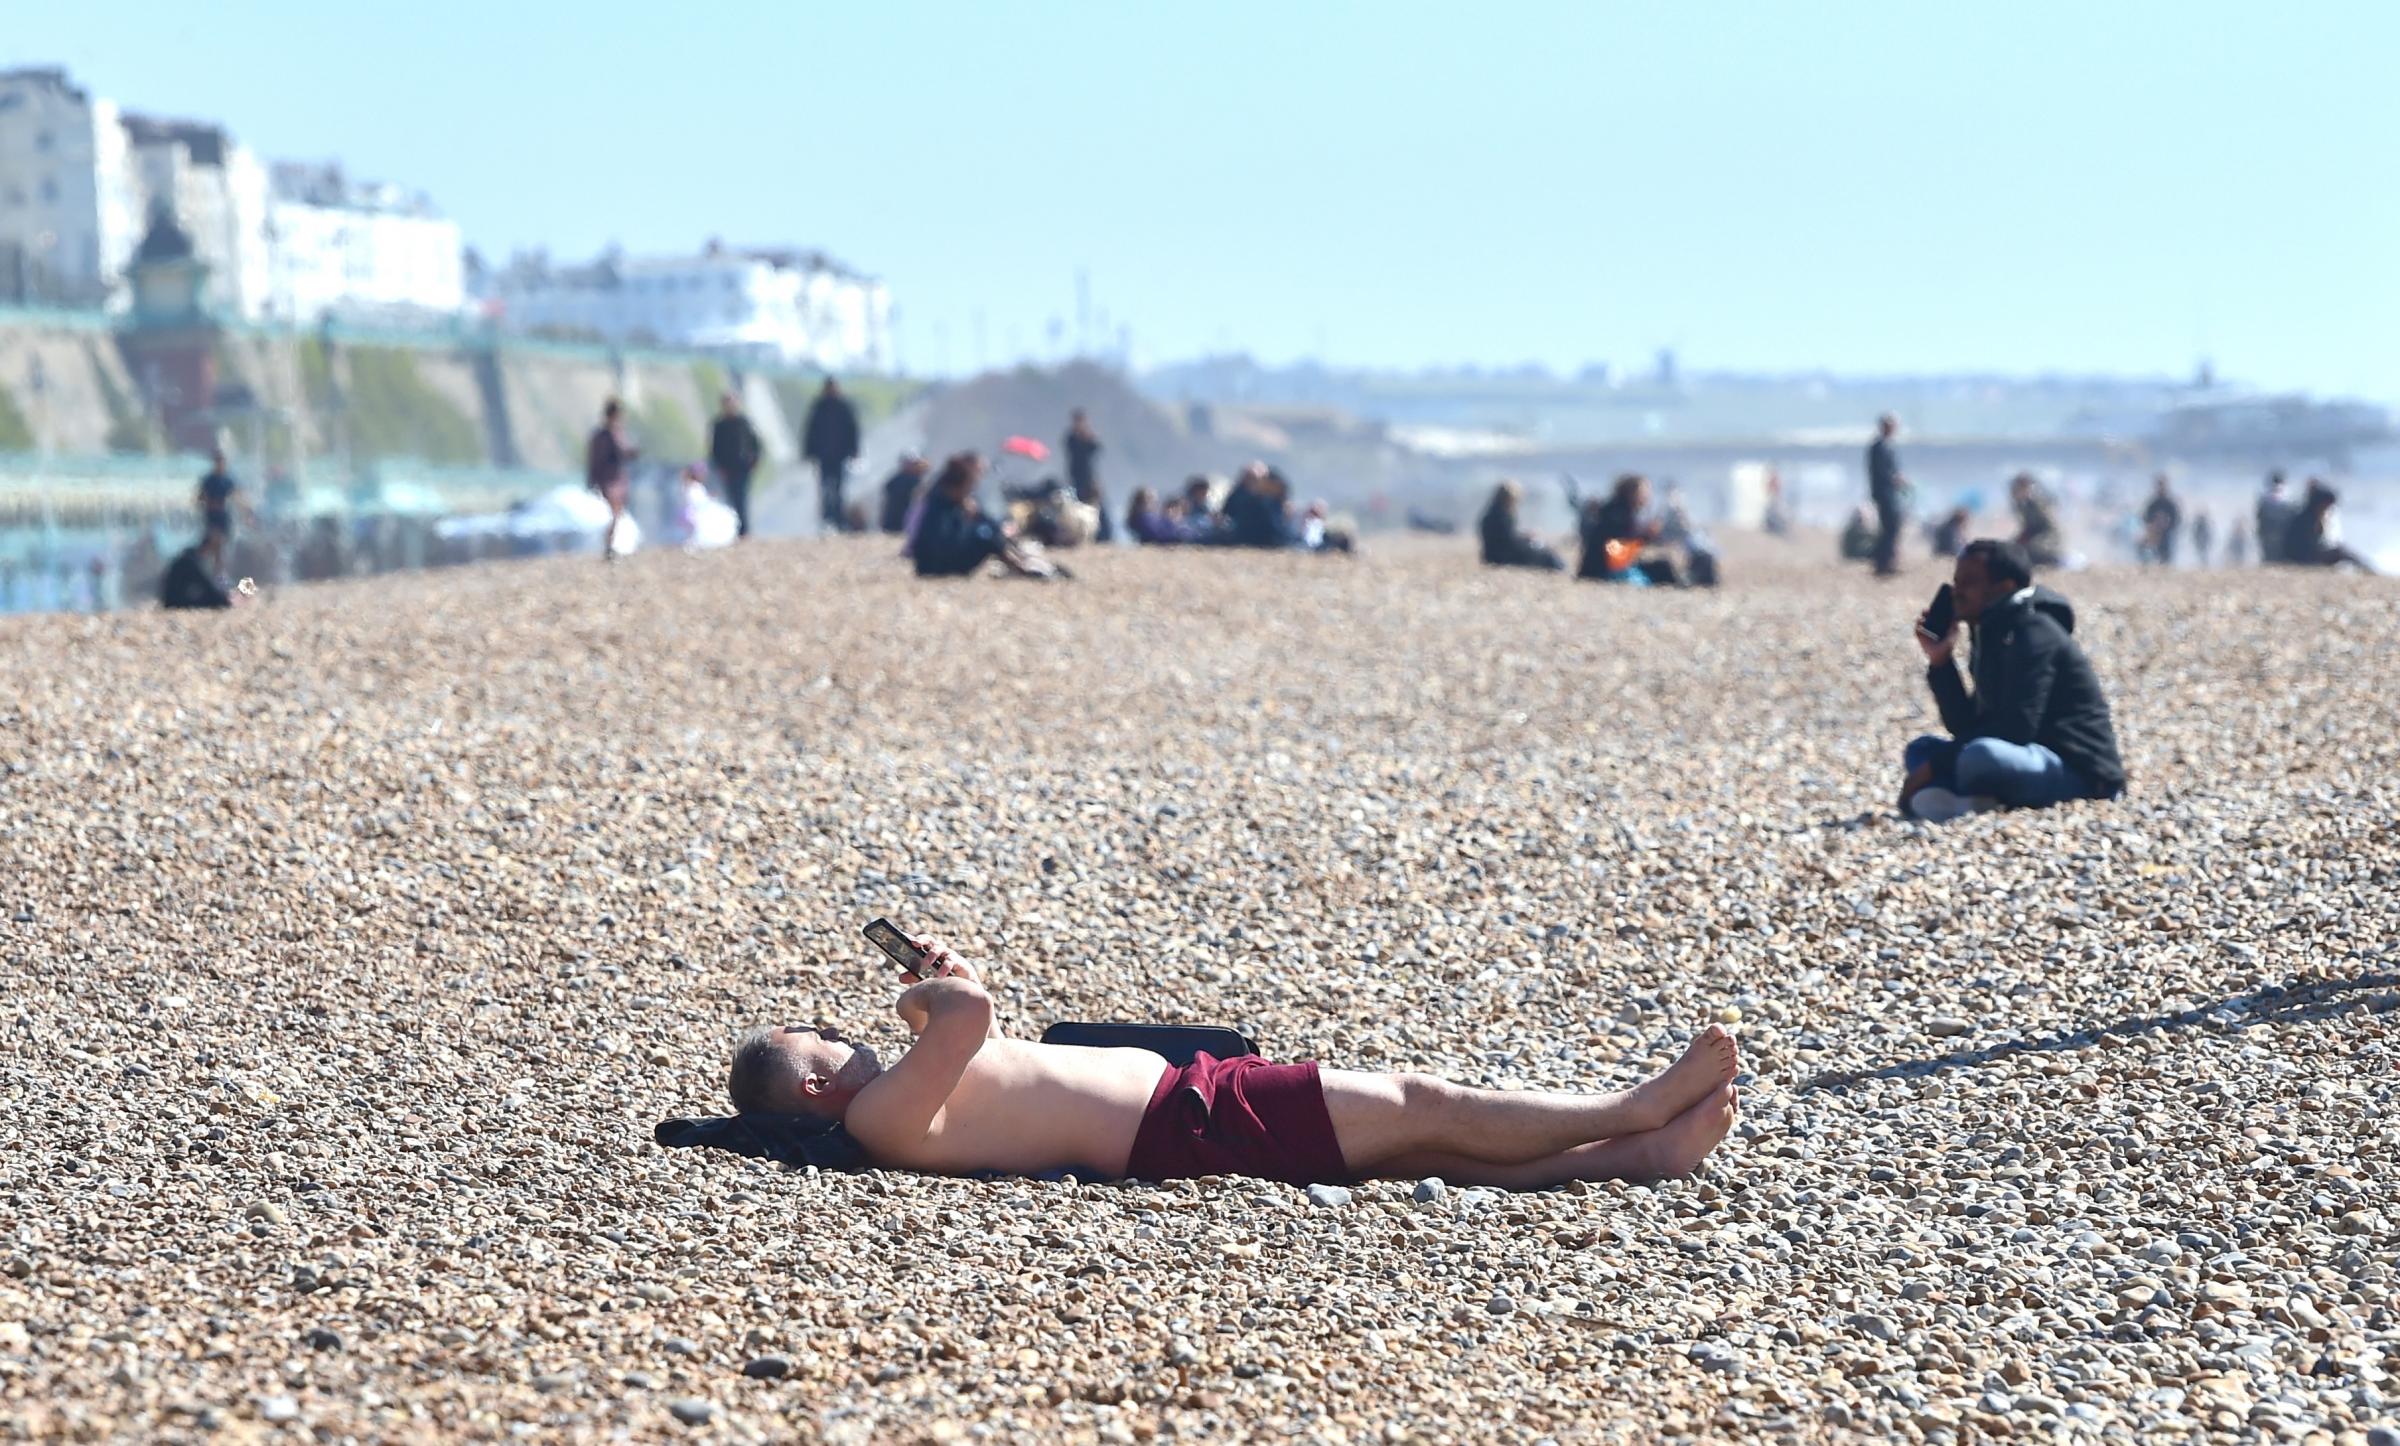 Brighton UK 29th March 2021 - A sunbather enjoys a lovely sunny day on Brighton beach as lockdown restrictions have started to ease in England Temperatures are expected to reach the mid 20s in some parts of the South East over next few days. : Credit